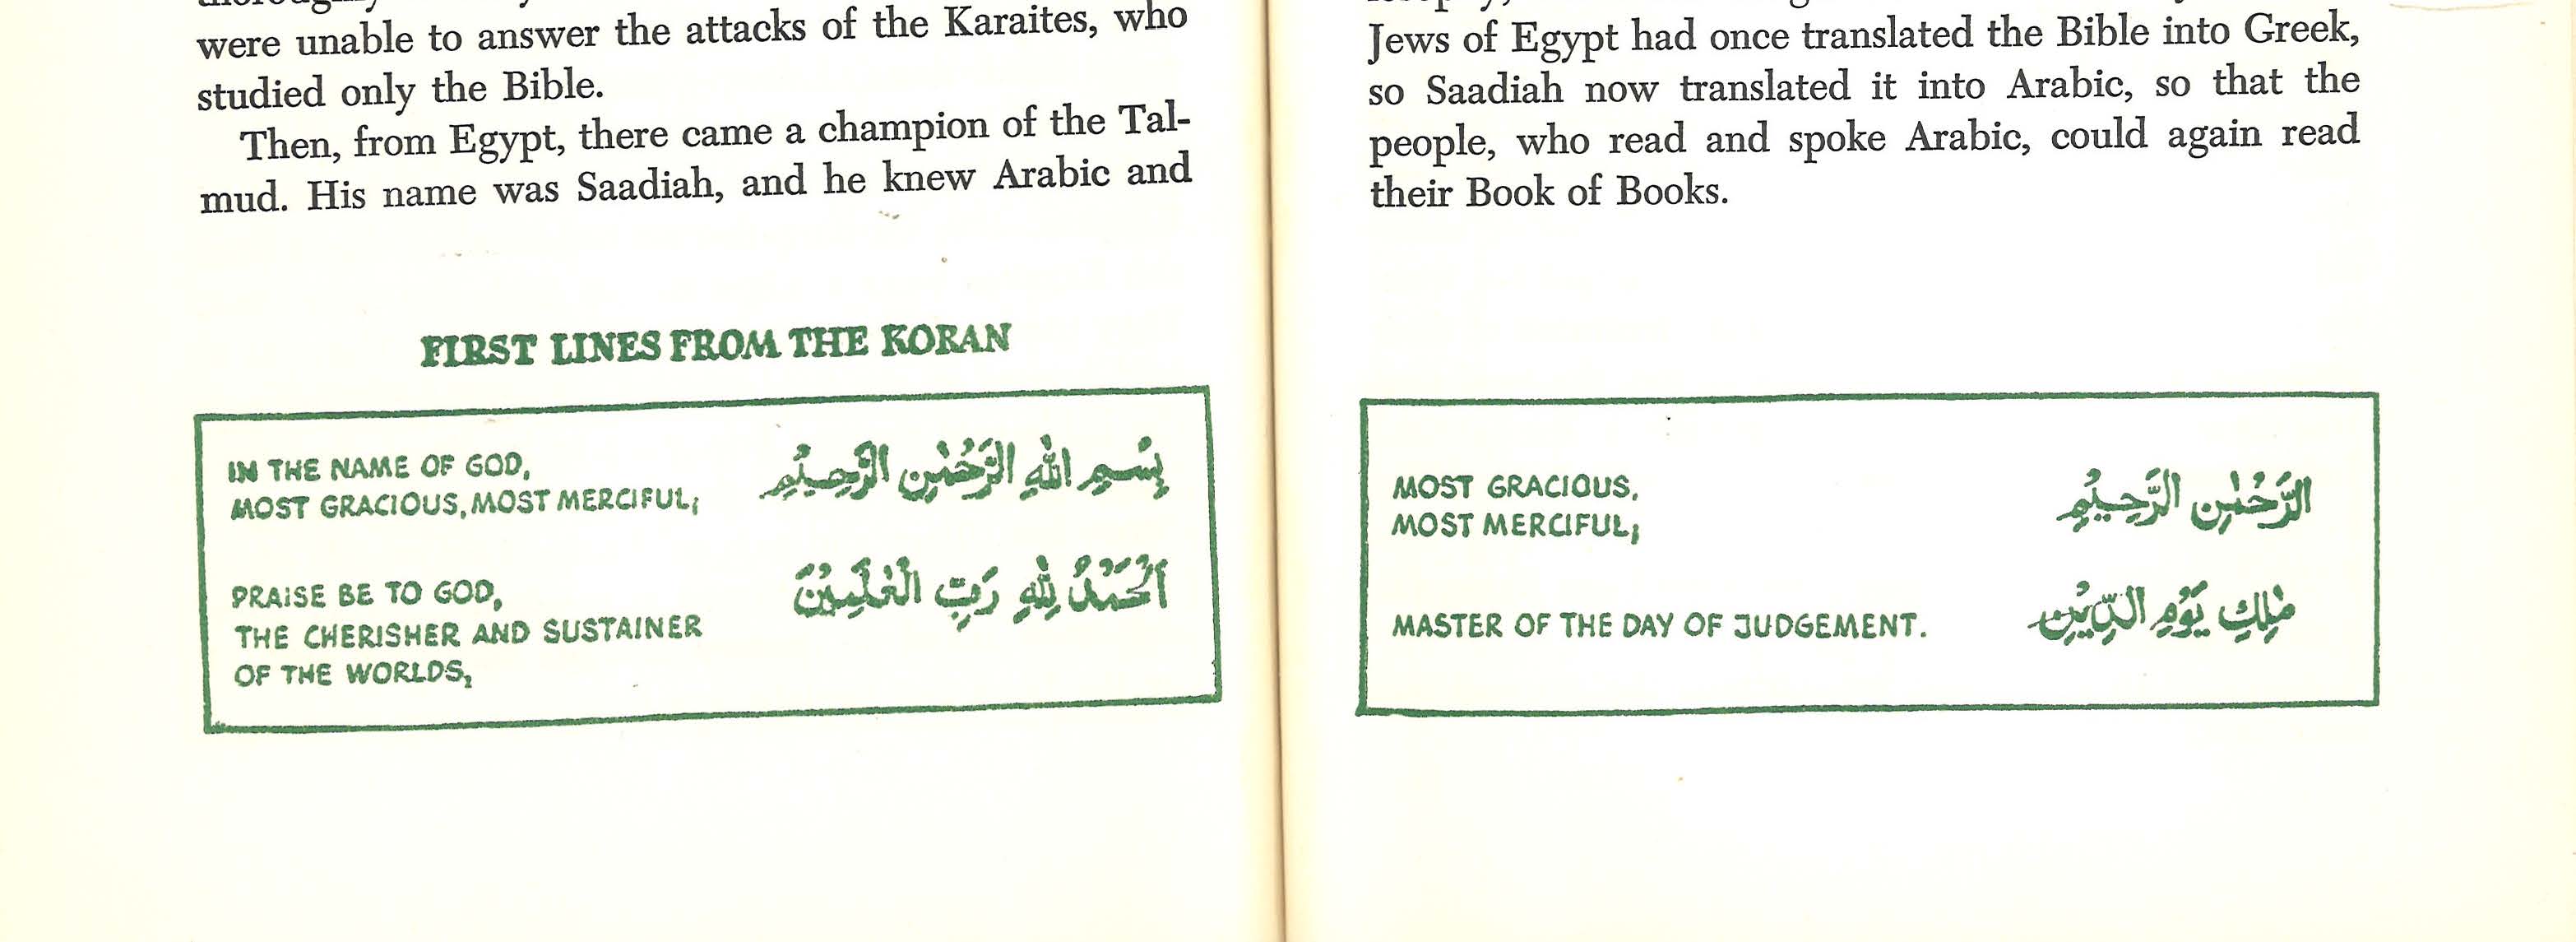 How Jewish children were introduced to the Qur'an in the 1950s